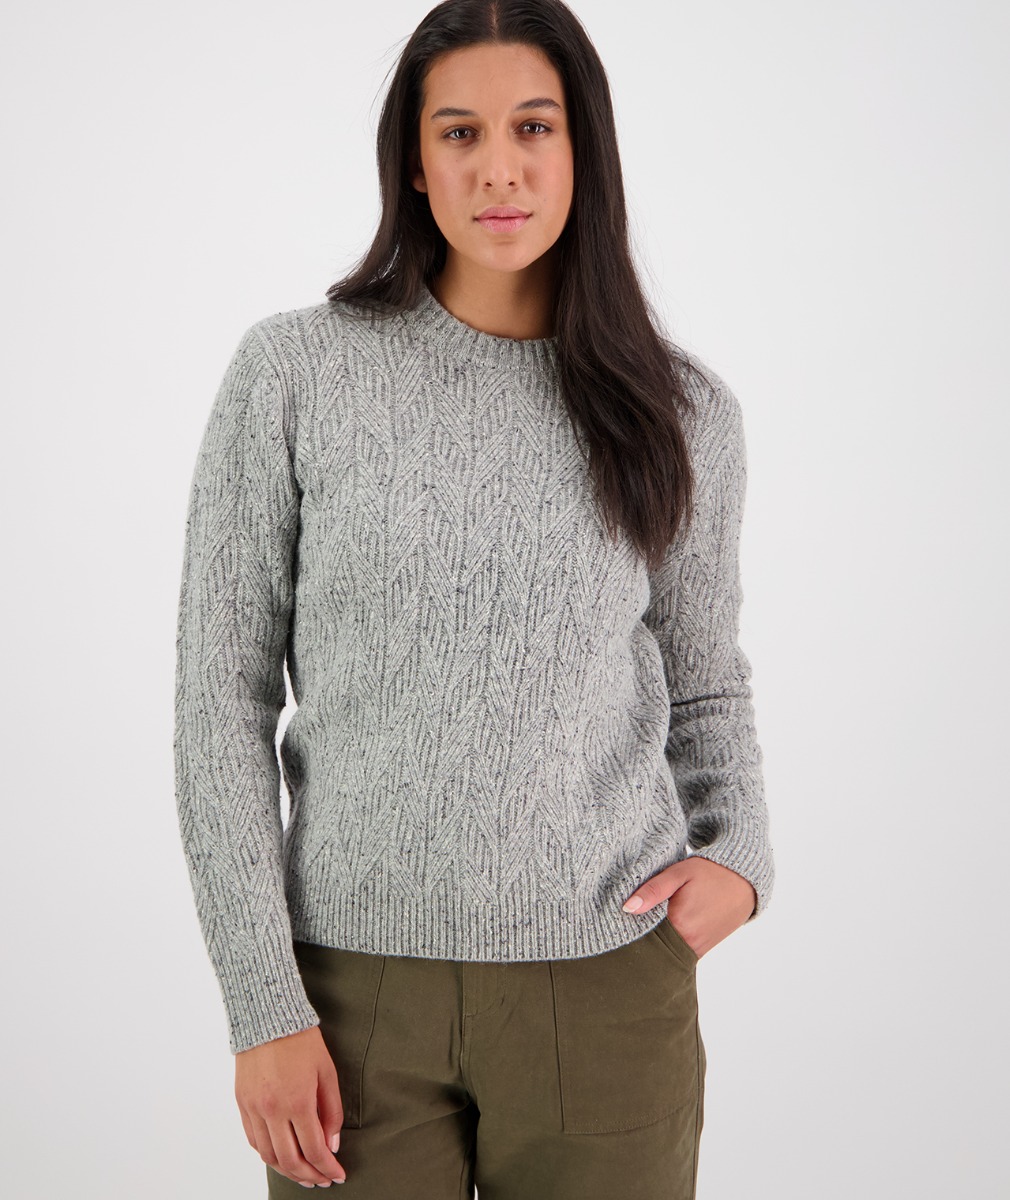 Swanndri Women's Kennedy Point Cable Knit Crew in Grey